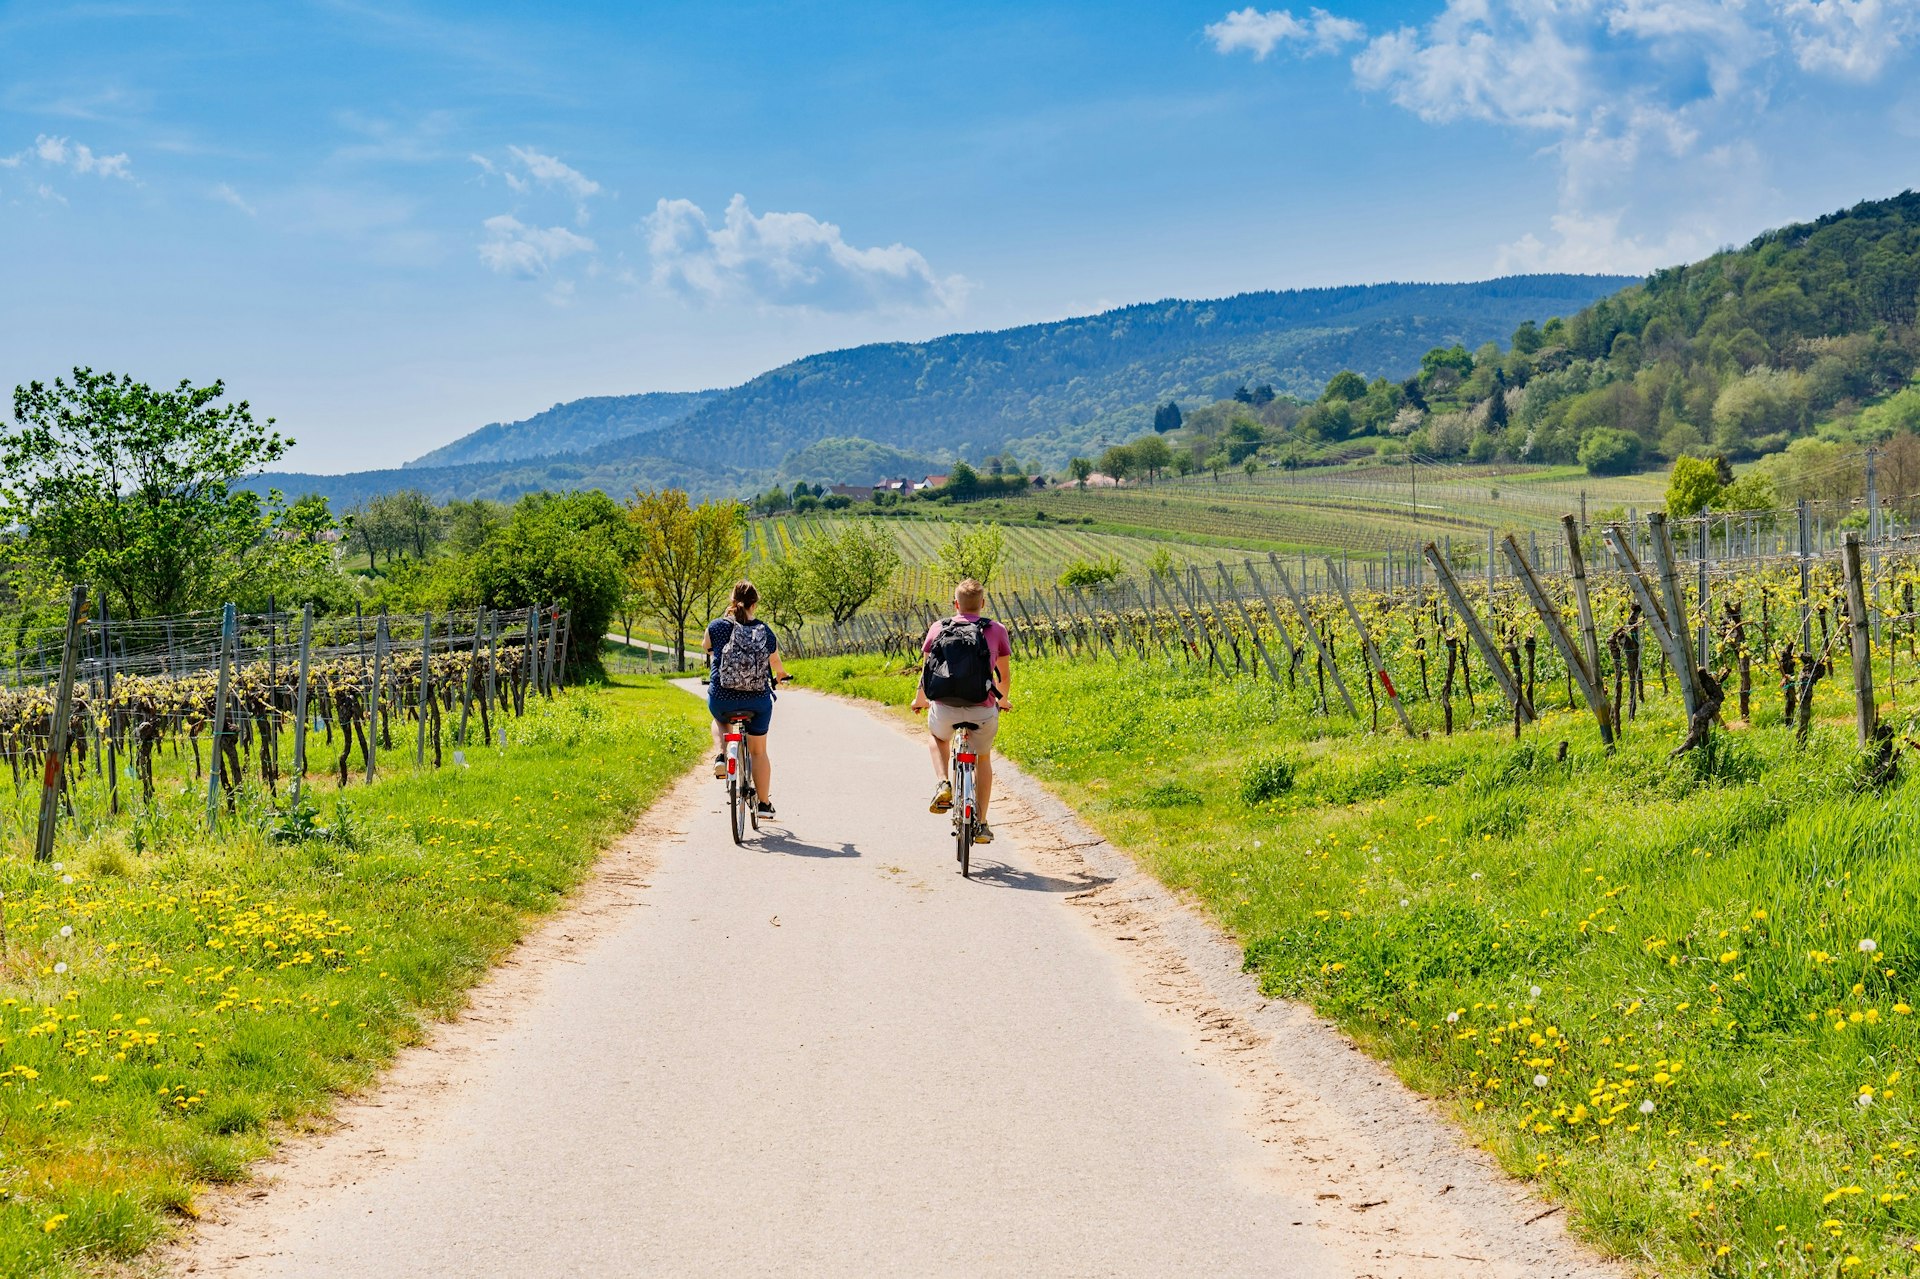 Two cyclists ride through vineyards in Rhineland-Palatinate; they cycle away from the camera and straight down a narrow road between rows of vines.